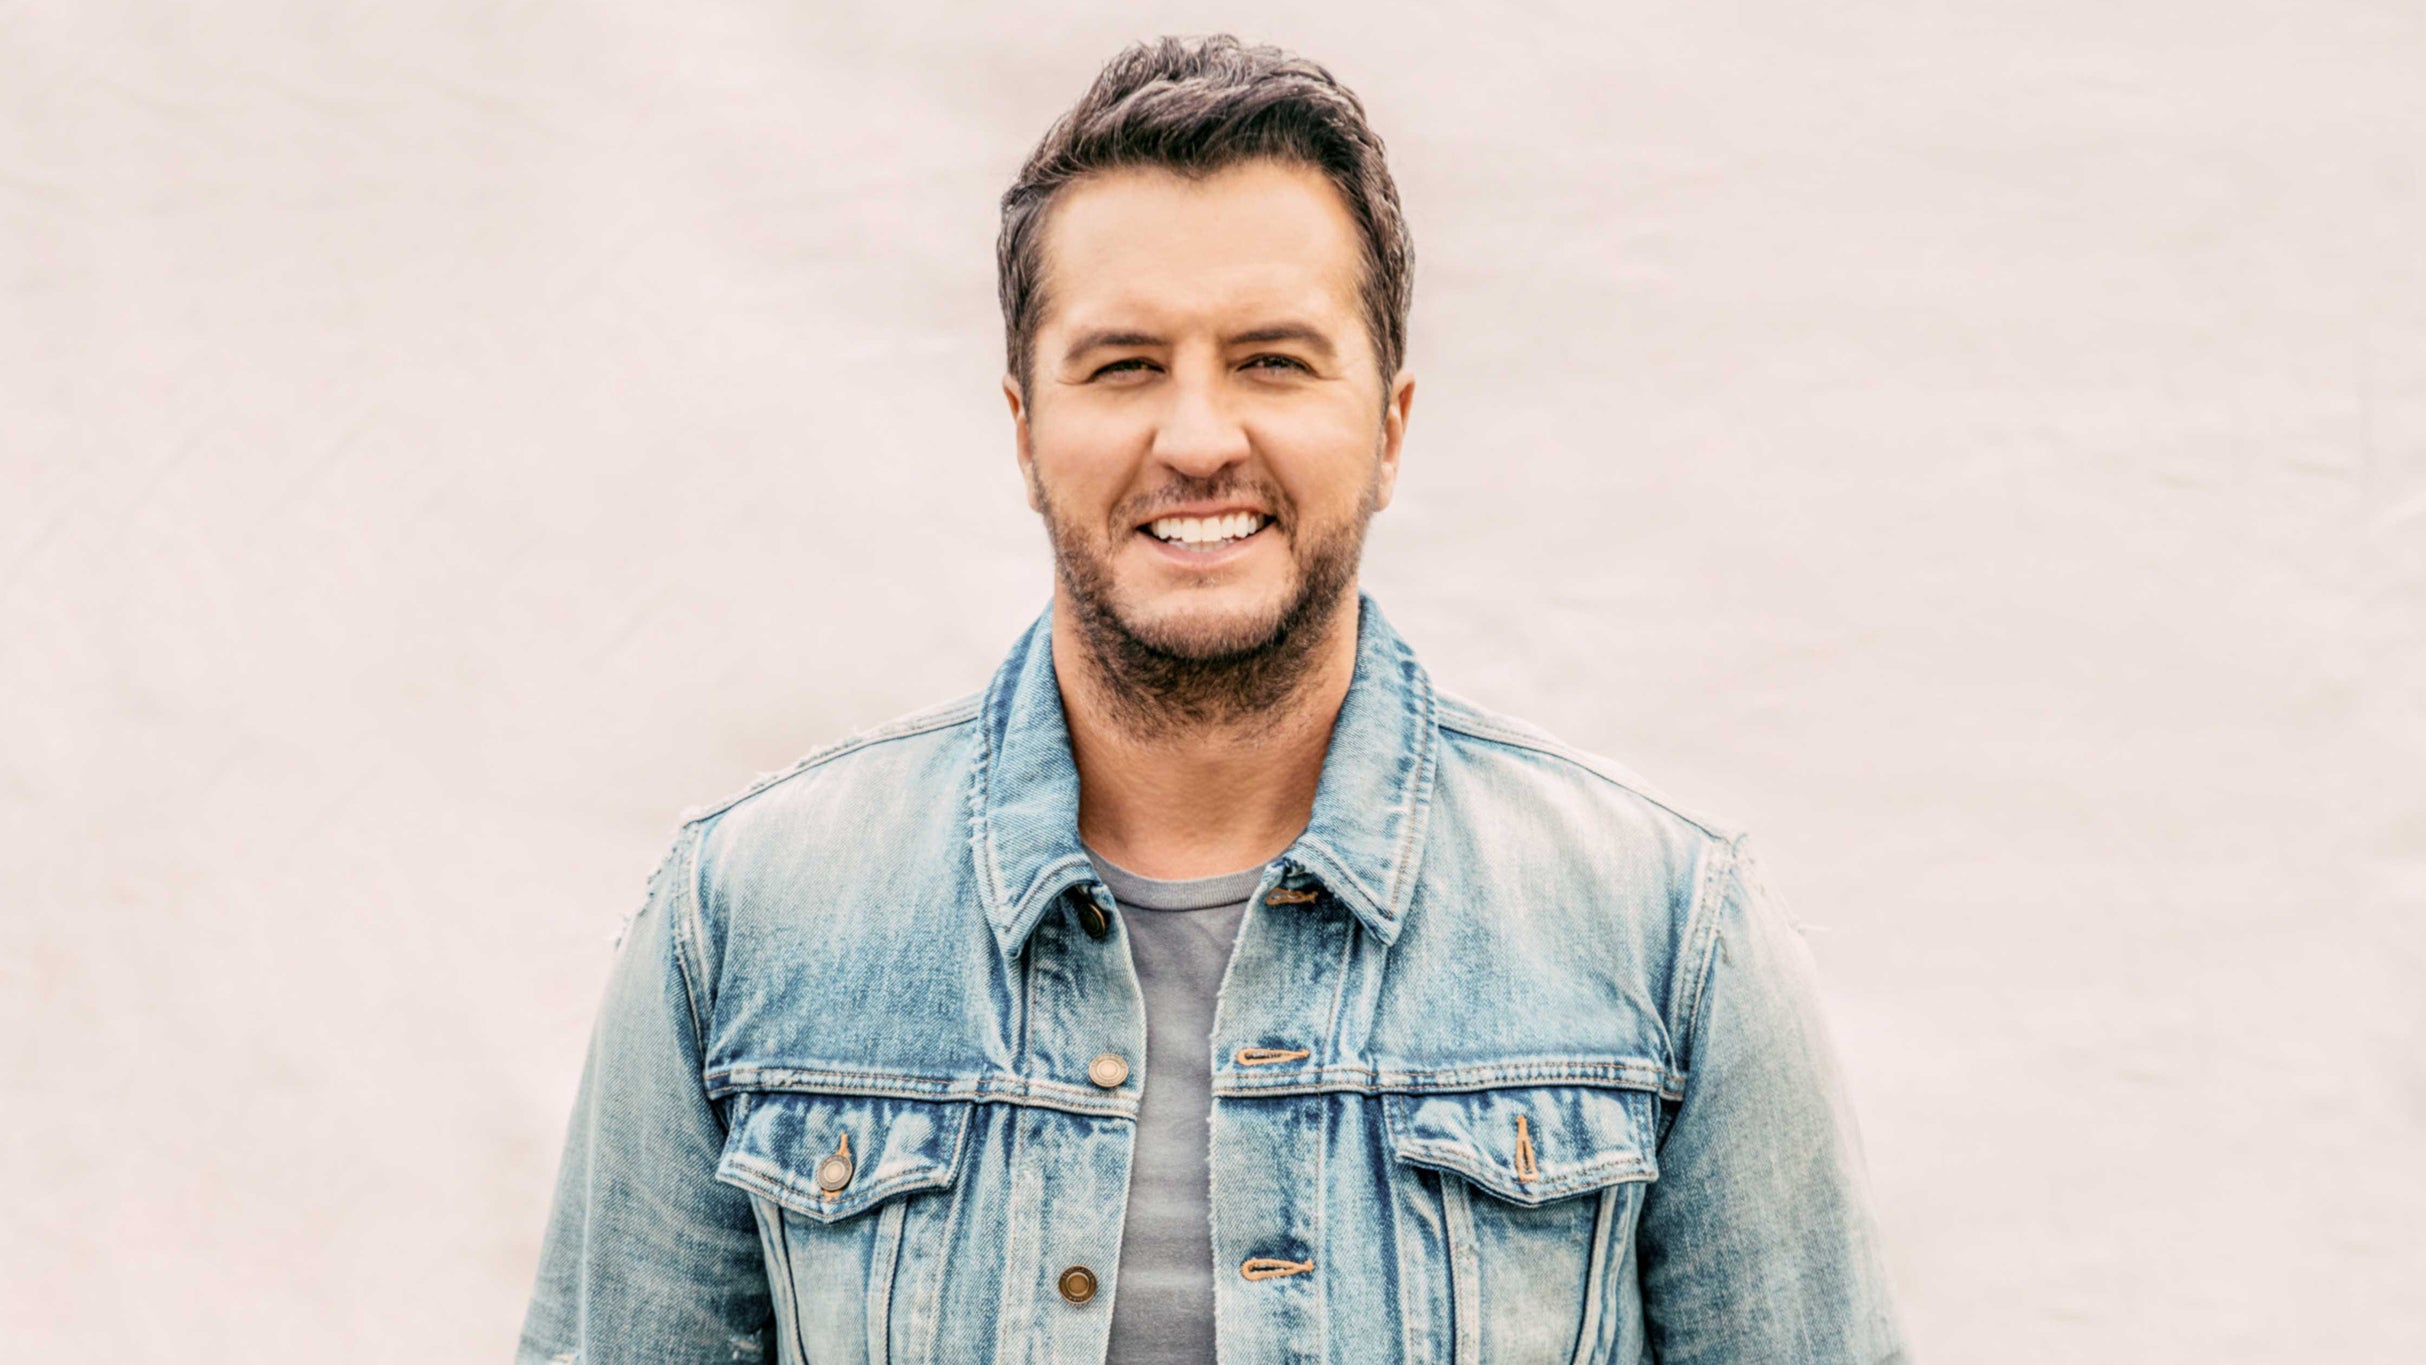 presale pa55w0rd for Luke Bryan: Mind of a Country Boy Tour 2024 tickets in Idaho Falls - ID (Hero Arena at the Mountain America Center)